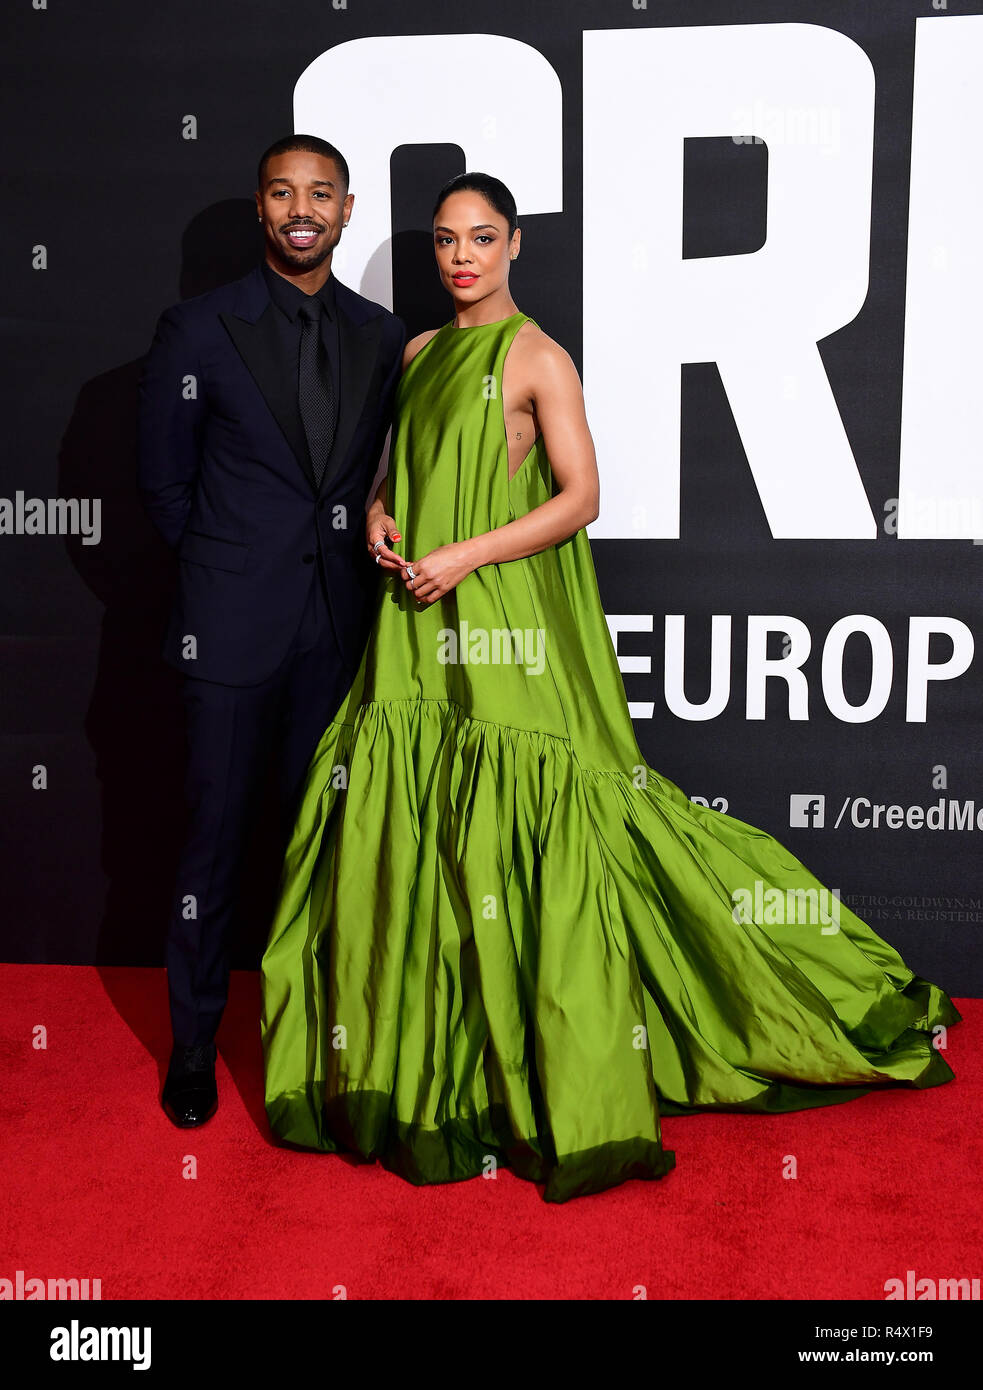 B. Jordan and Tessa Thompson attending the premiere of Creed 2 at the BFI Imax, Waterloo, London Stock Photo - Alamy